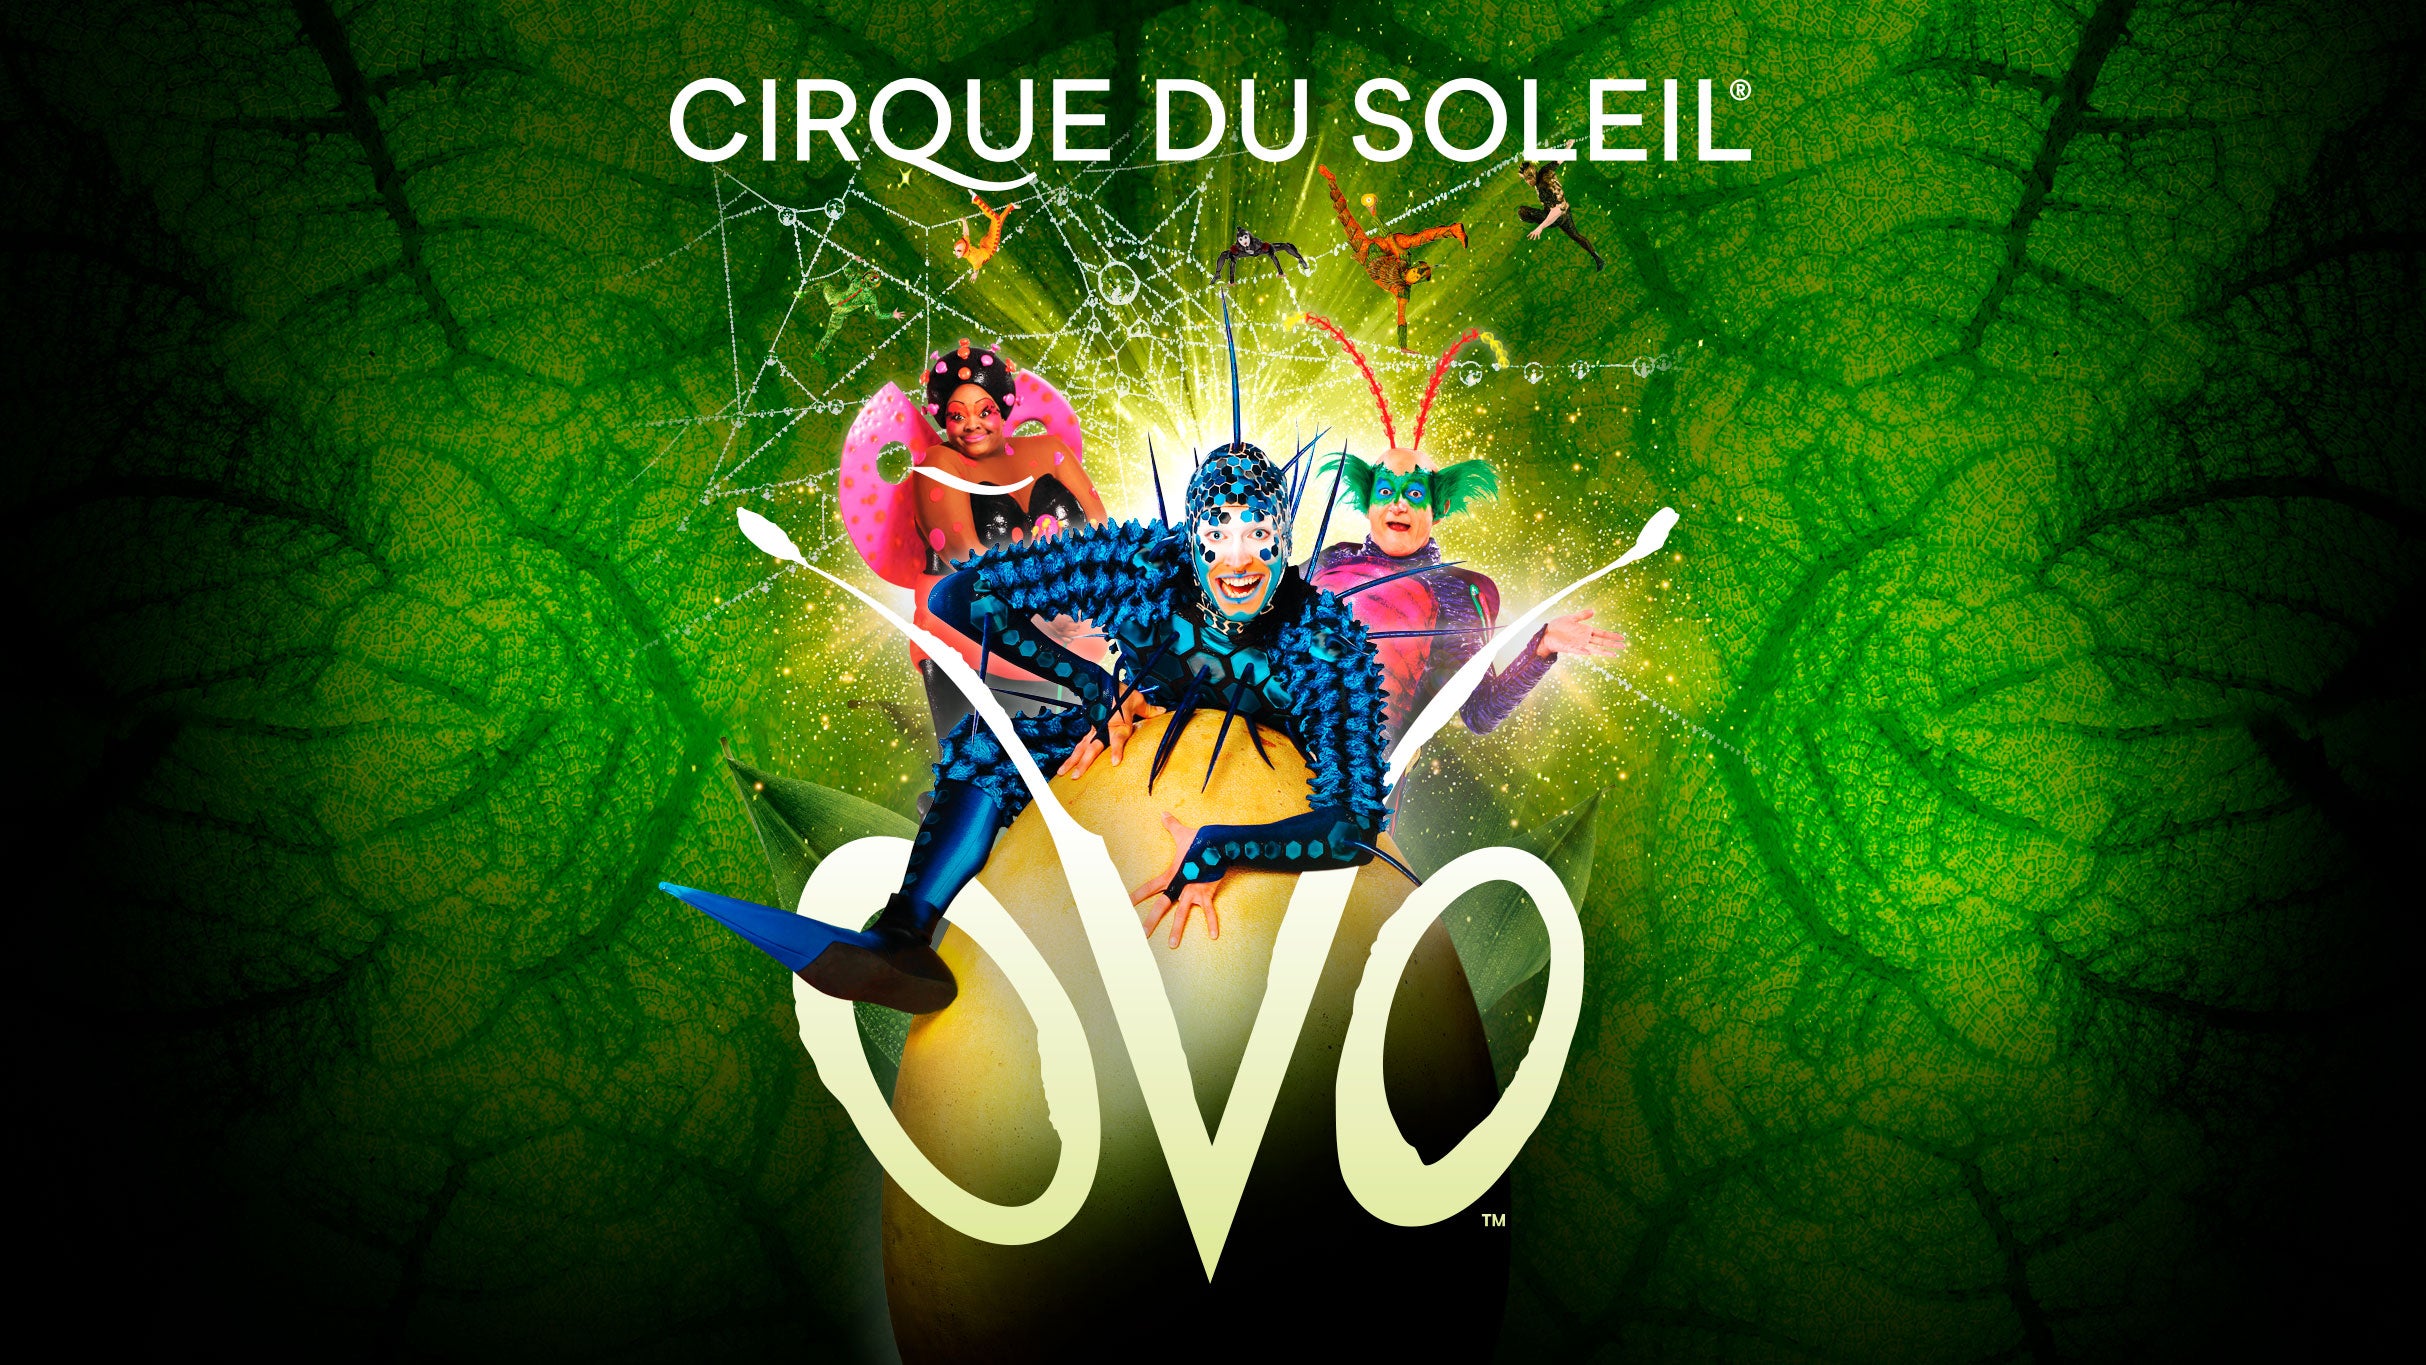 exclusive presale password to Cirque du Soleil: OVO face value tickets in Belmont Park - Long Island